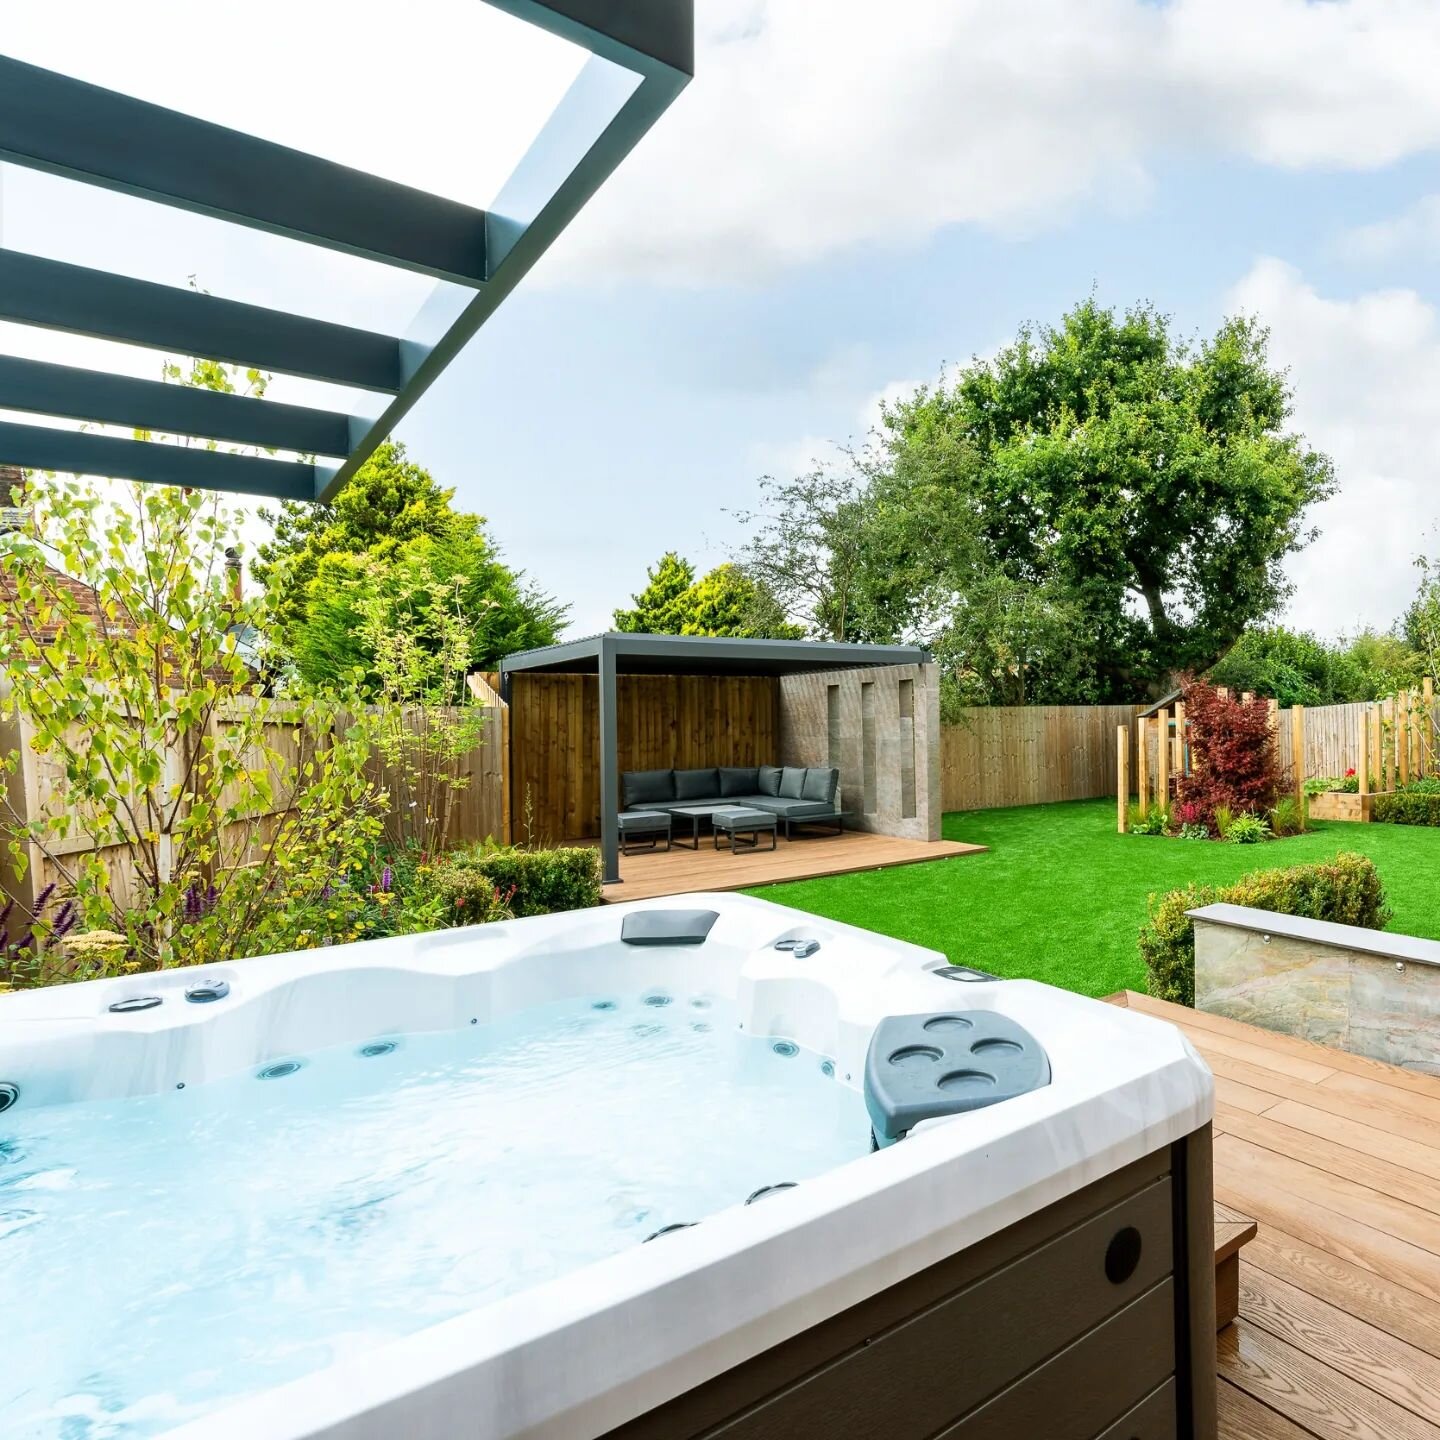 A look back at a job from a project last yea!)r!

A typical new build garden that we designed to be a family orientated space. Firepit, outdoor kitchen, hot tub, peegola, play area, lawn, the Client wanted it all and we used angles for added interest